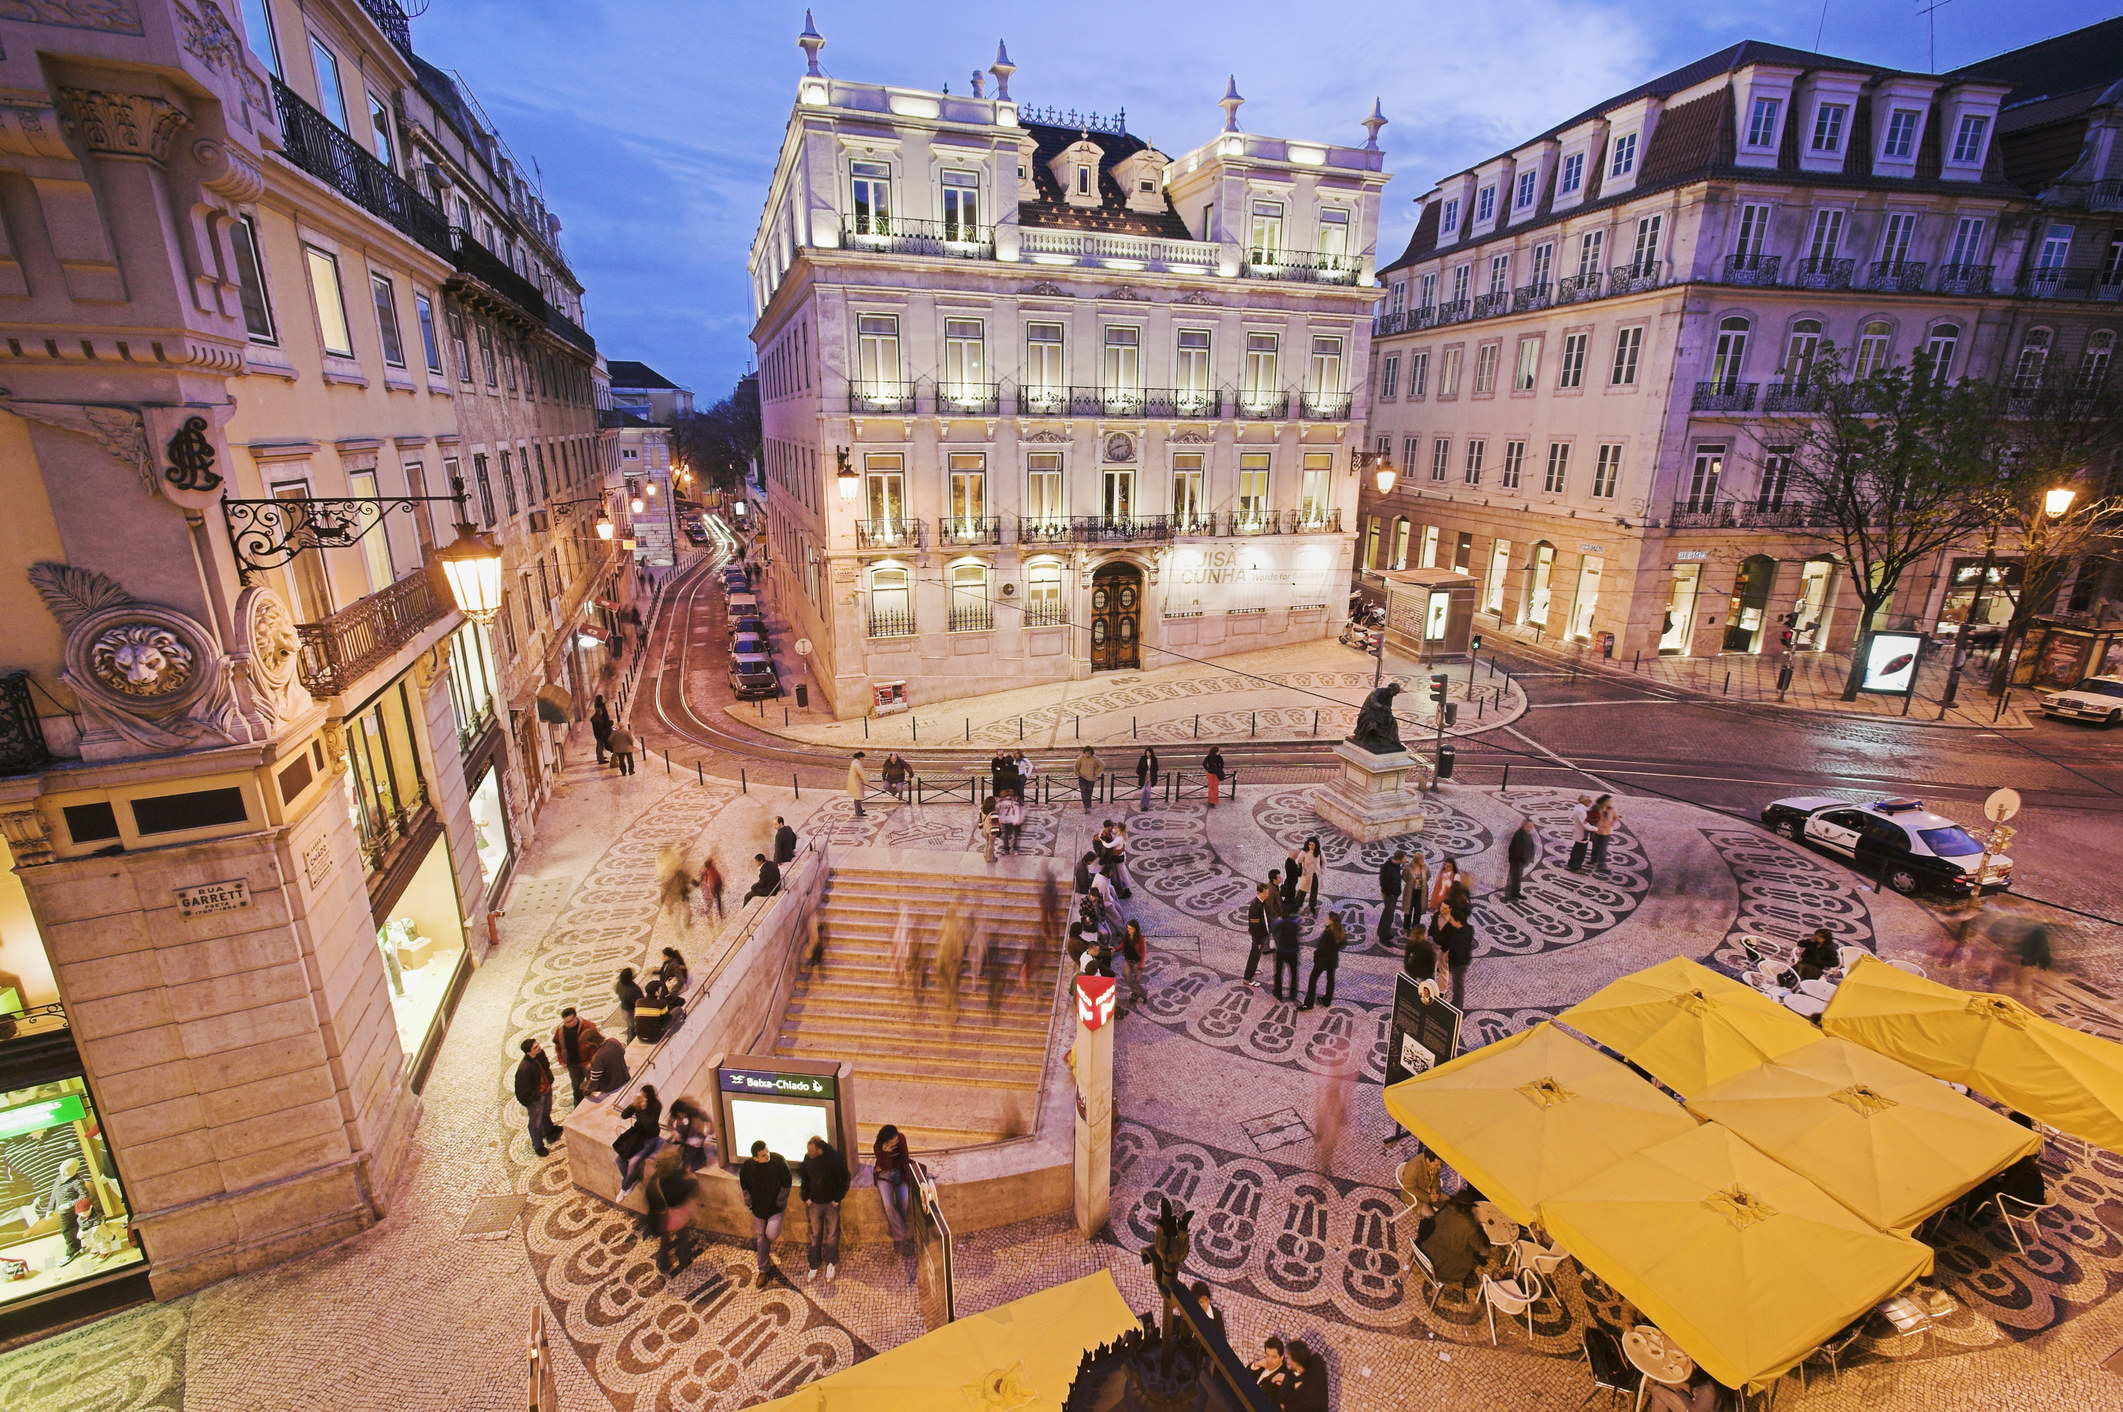 A city square in Lisbon